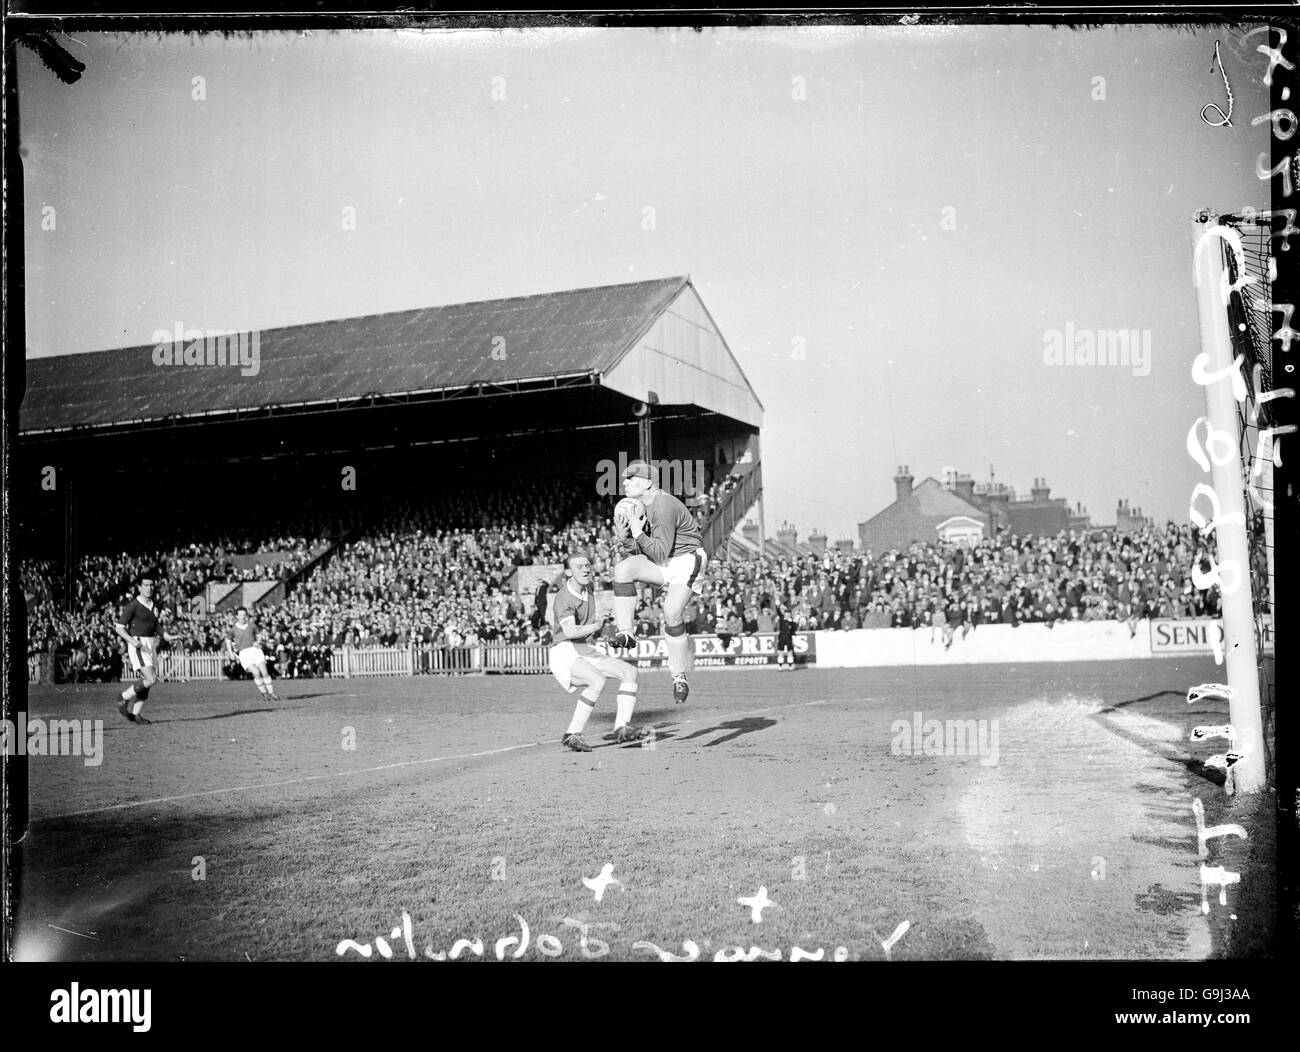 Soccer - Football League Division Two - Leyton Orient v Liverpool. Liverpool goalkeeper Tommy Younger (r) catches the ball under pressure from Leyton Orient's Tom Johnston (l) Stock Photo